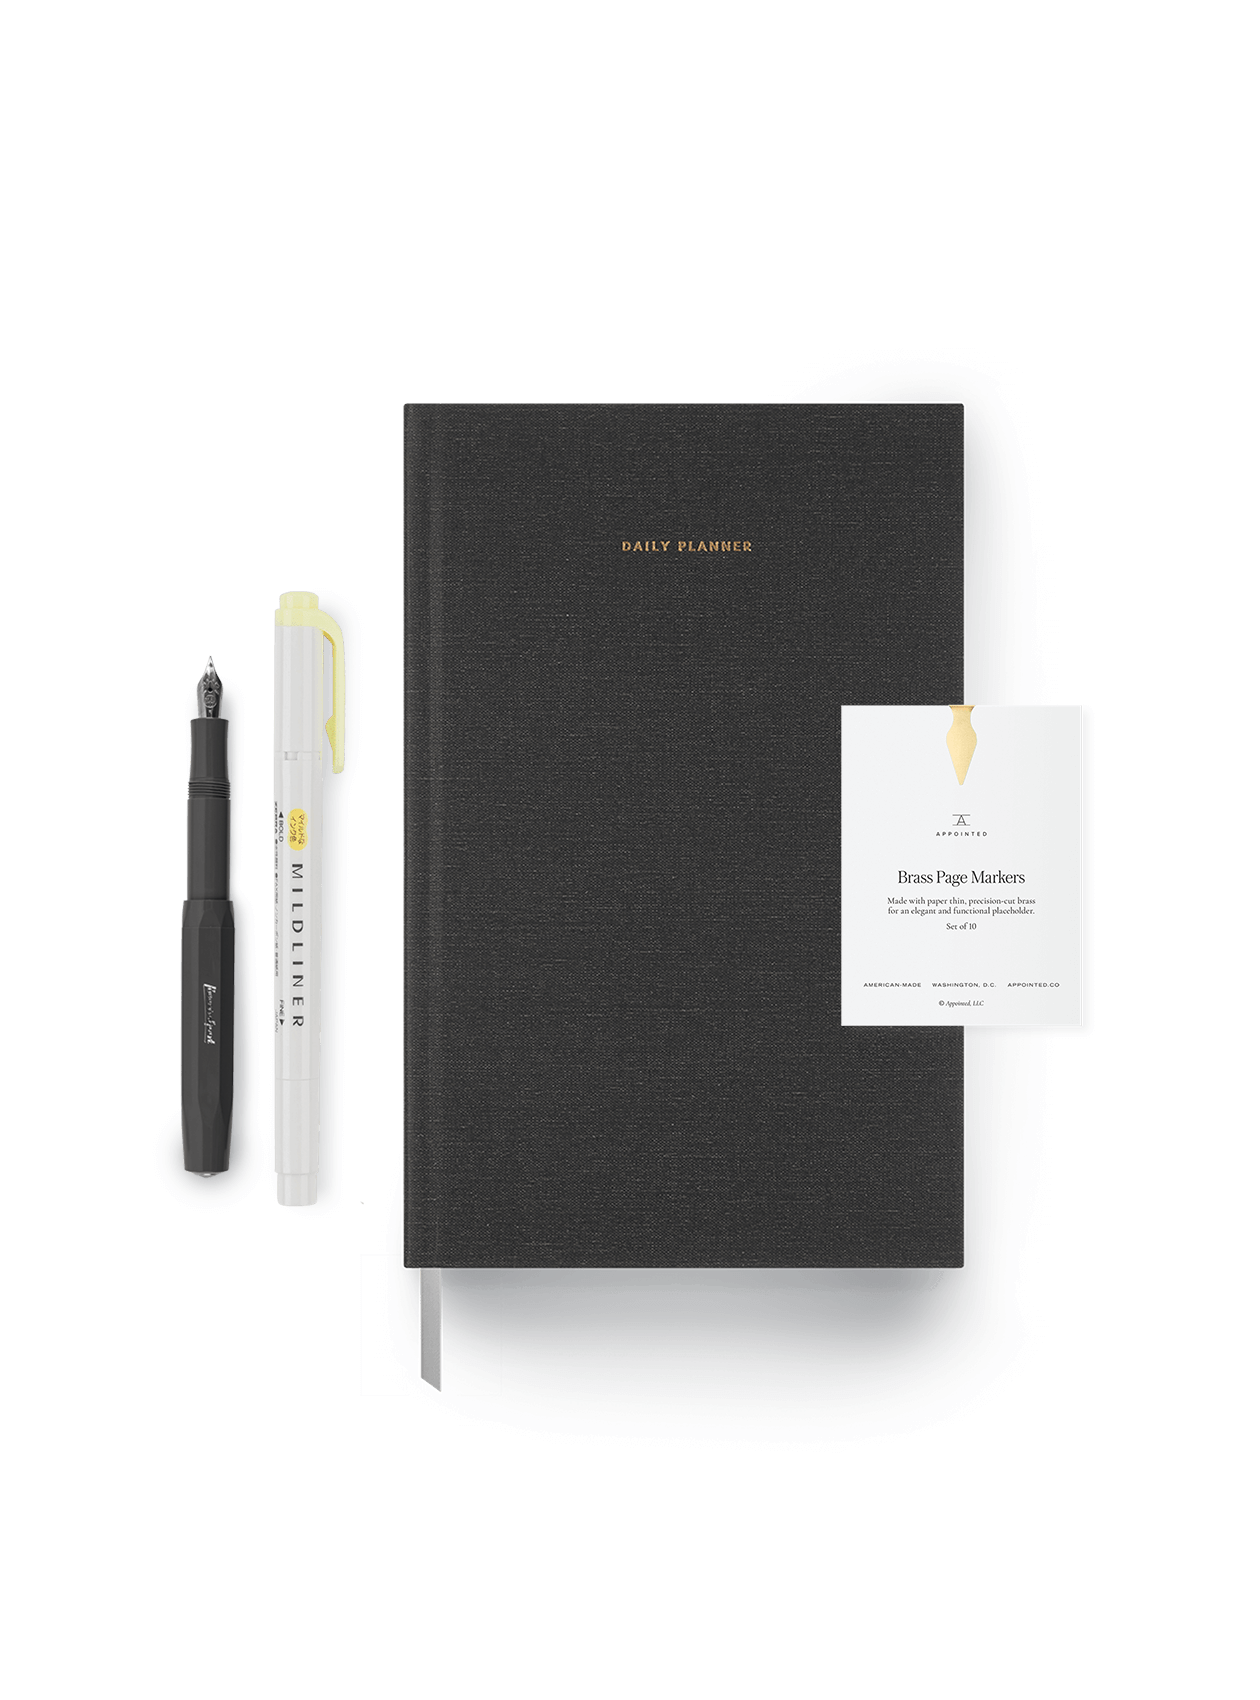 For the Graduate Set with Daily Planner, Brass Page Markers, Mildliner Highlighter, and Kaweco Ballpoint Pen